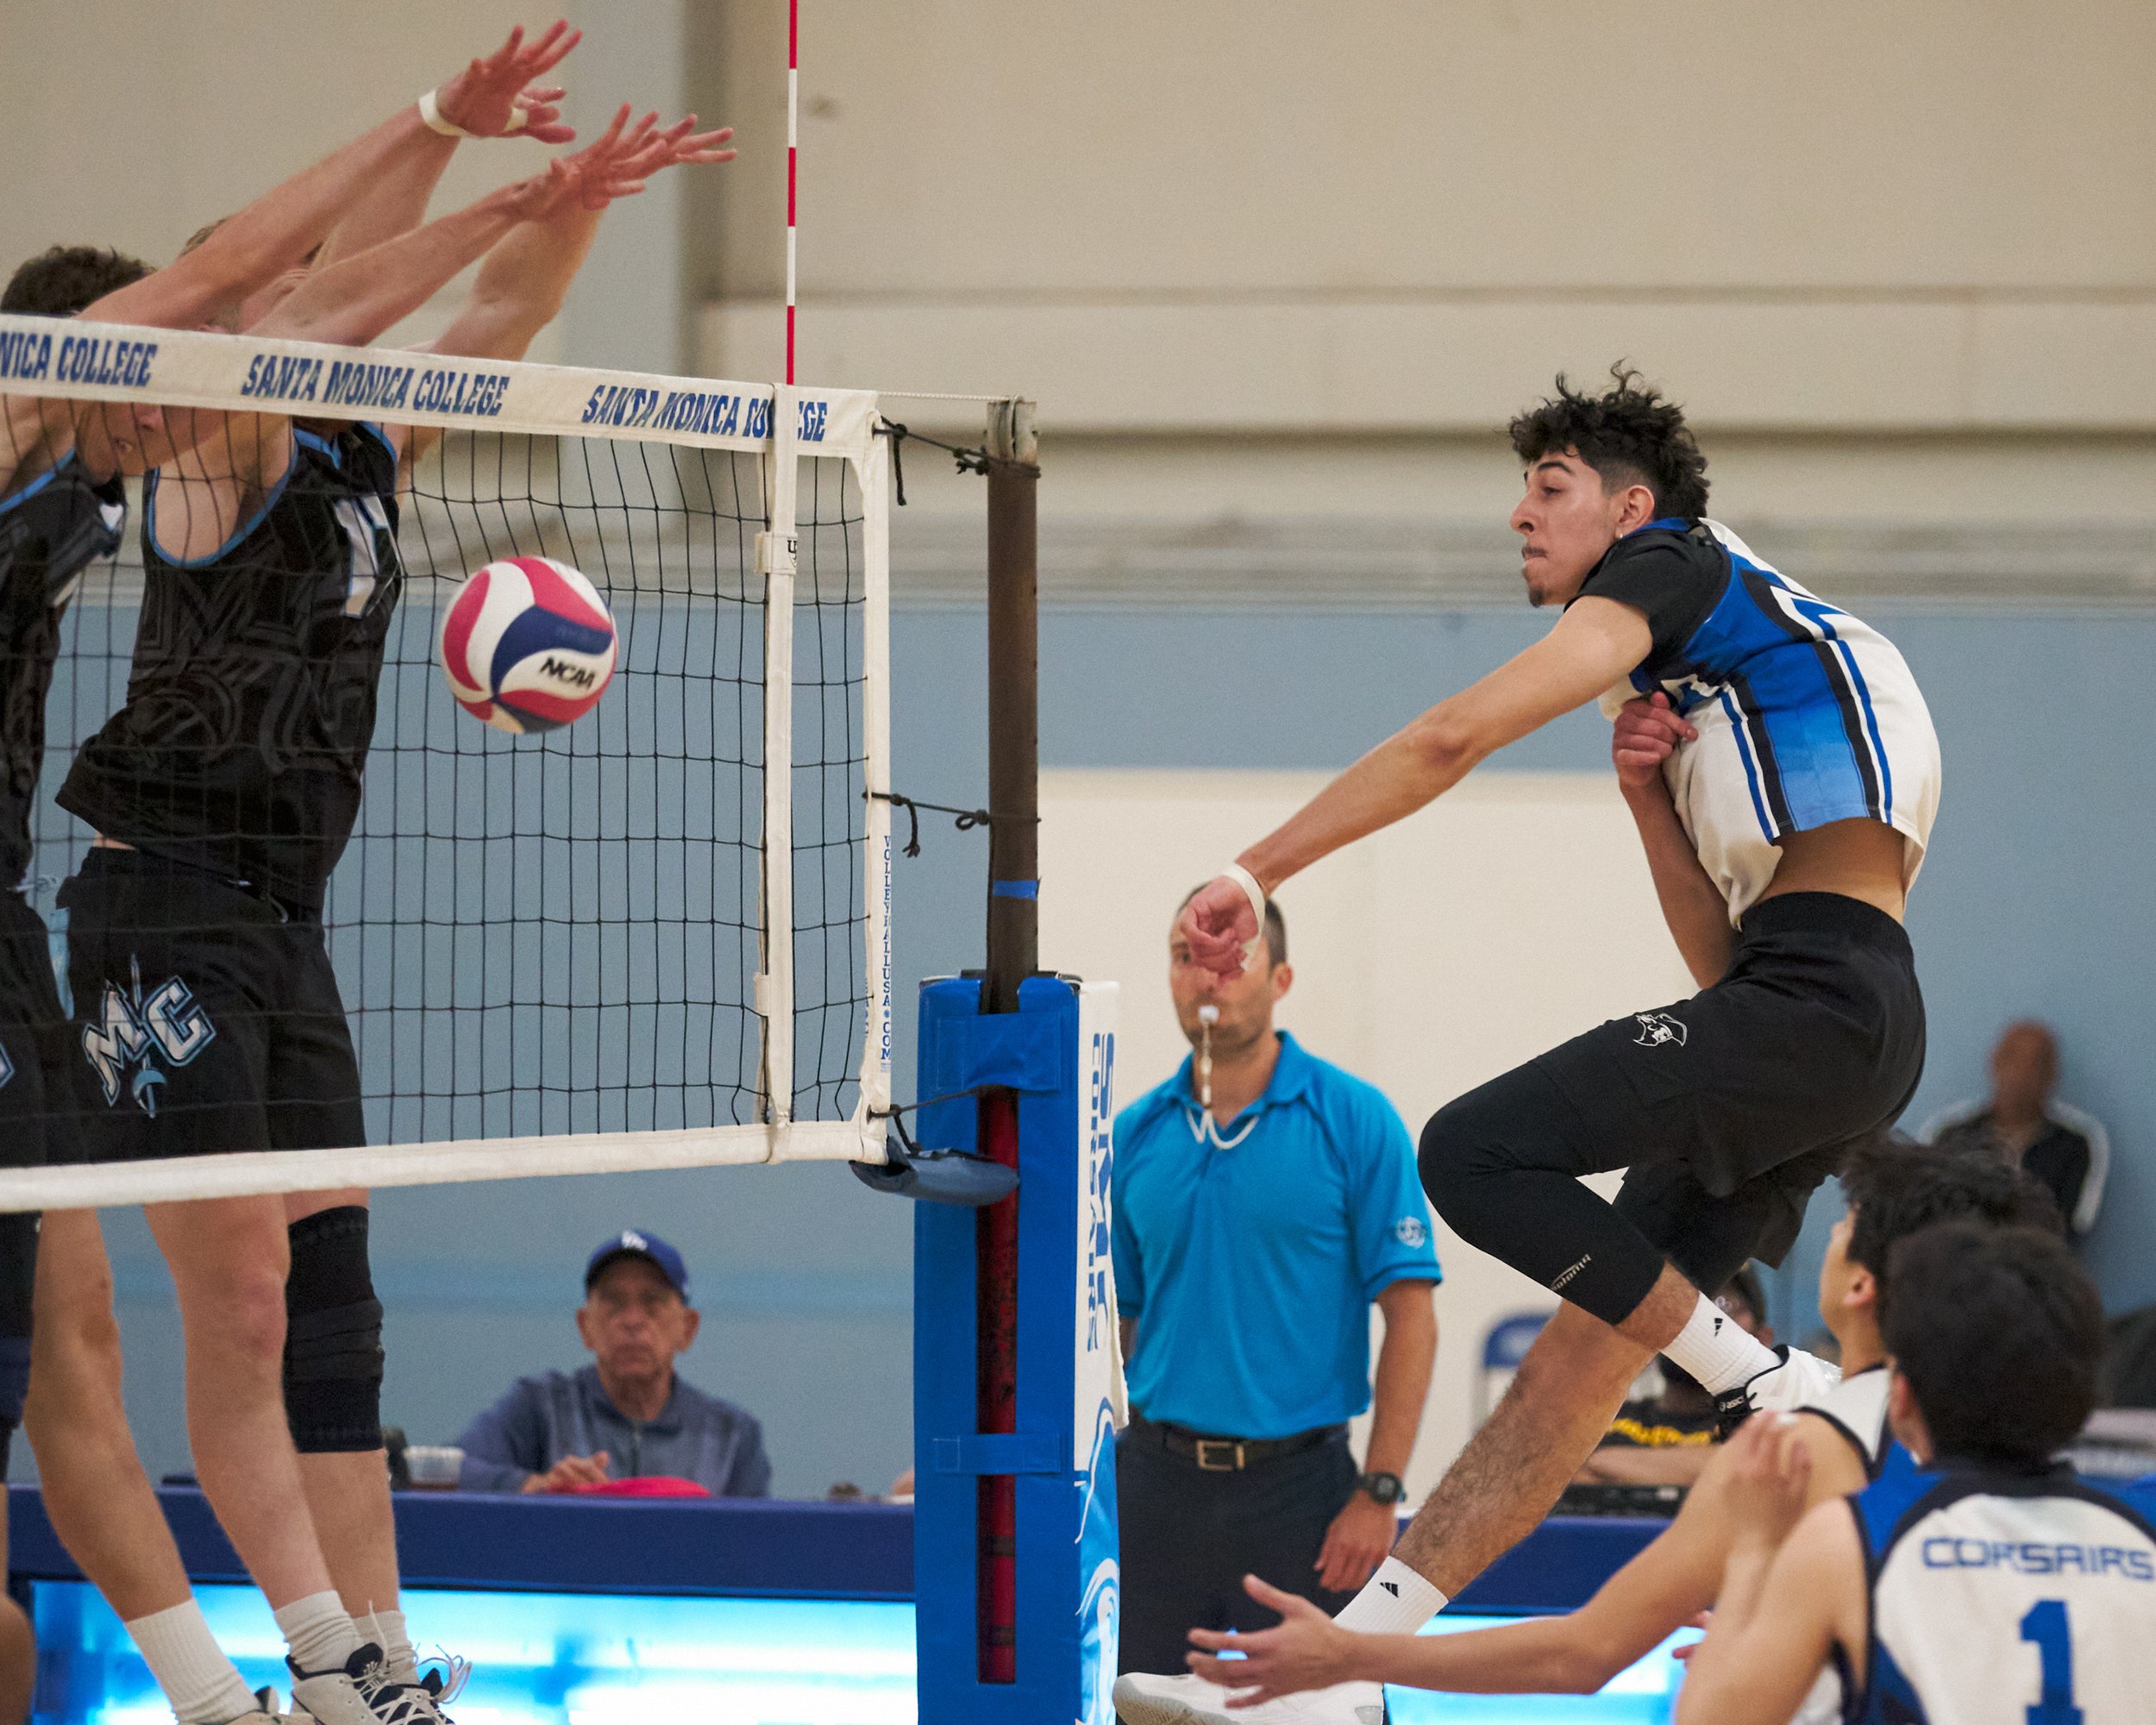  Moorpark College Raiders' Sean Schmutz and Michael Stahl block an attack from Santa Monica College Corsairs' Luis Garzon during the men's volleyball match on Wednesday, April 12, 2023, at Corsair Gym in Santa Monica, Calif. The Corsairs lost 3-0. (N